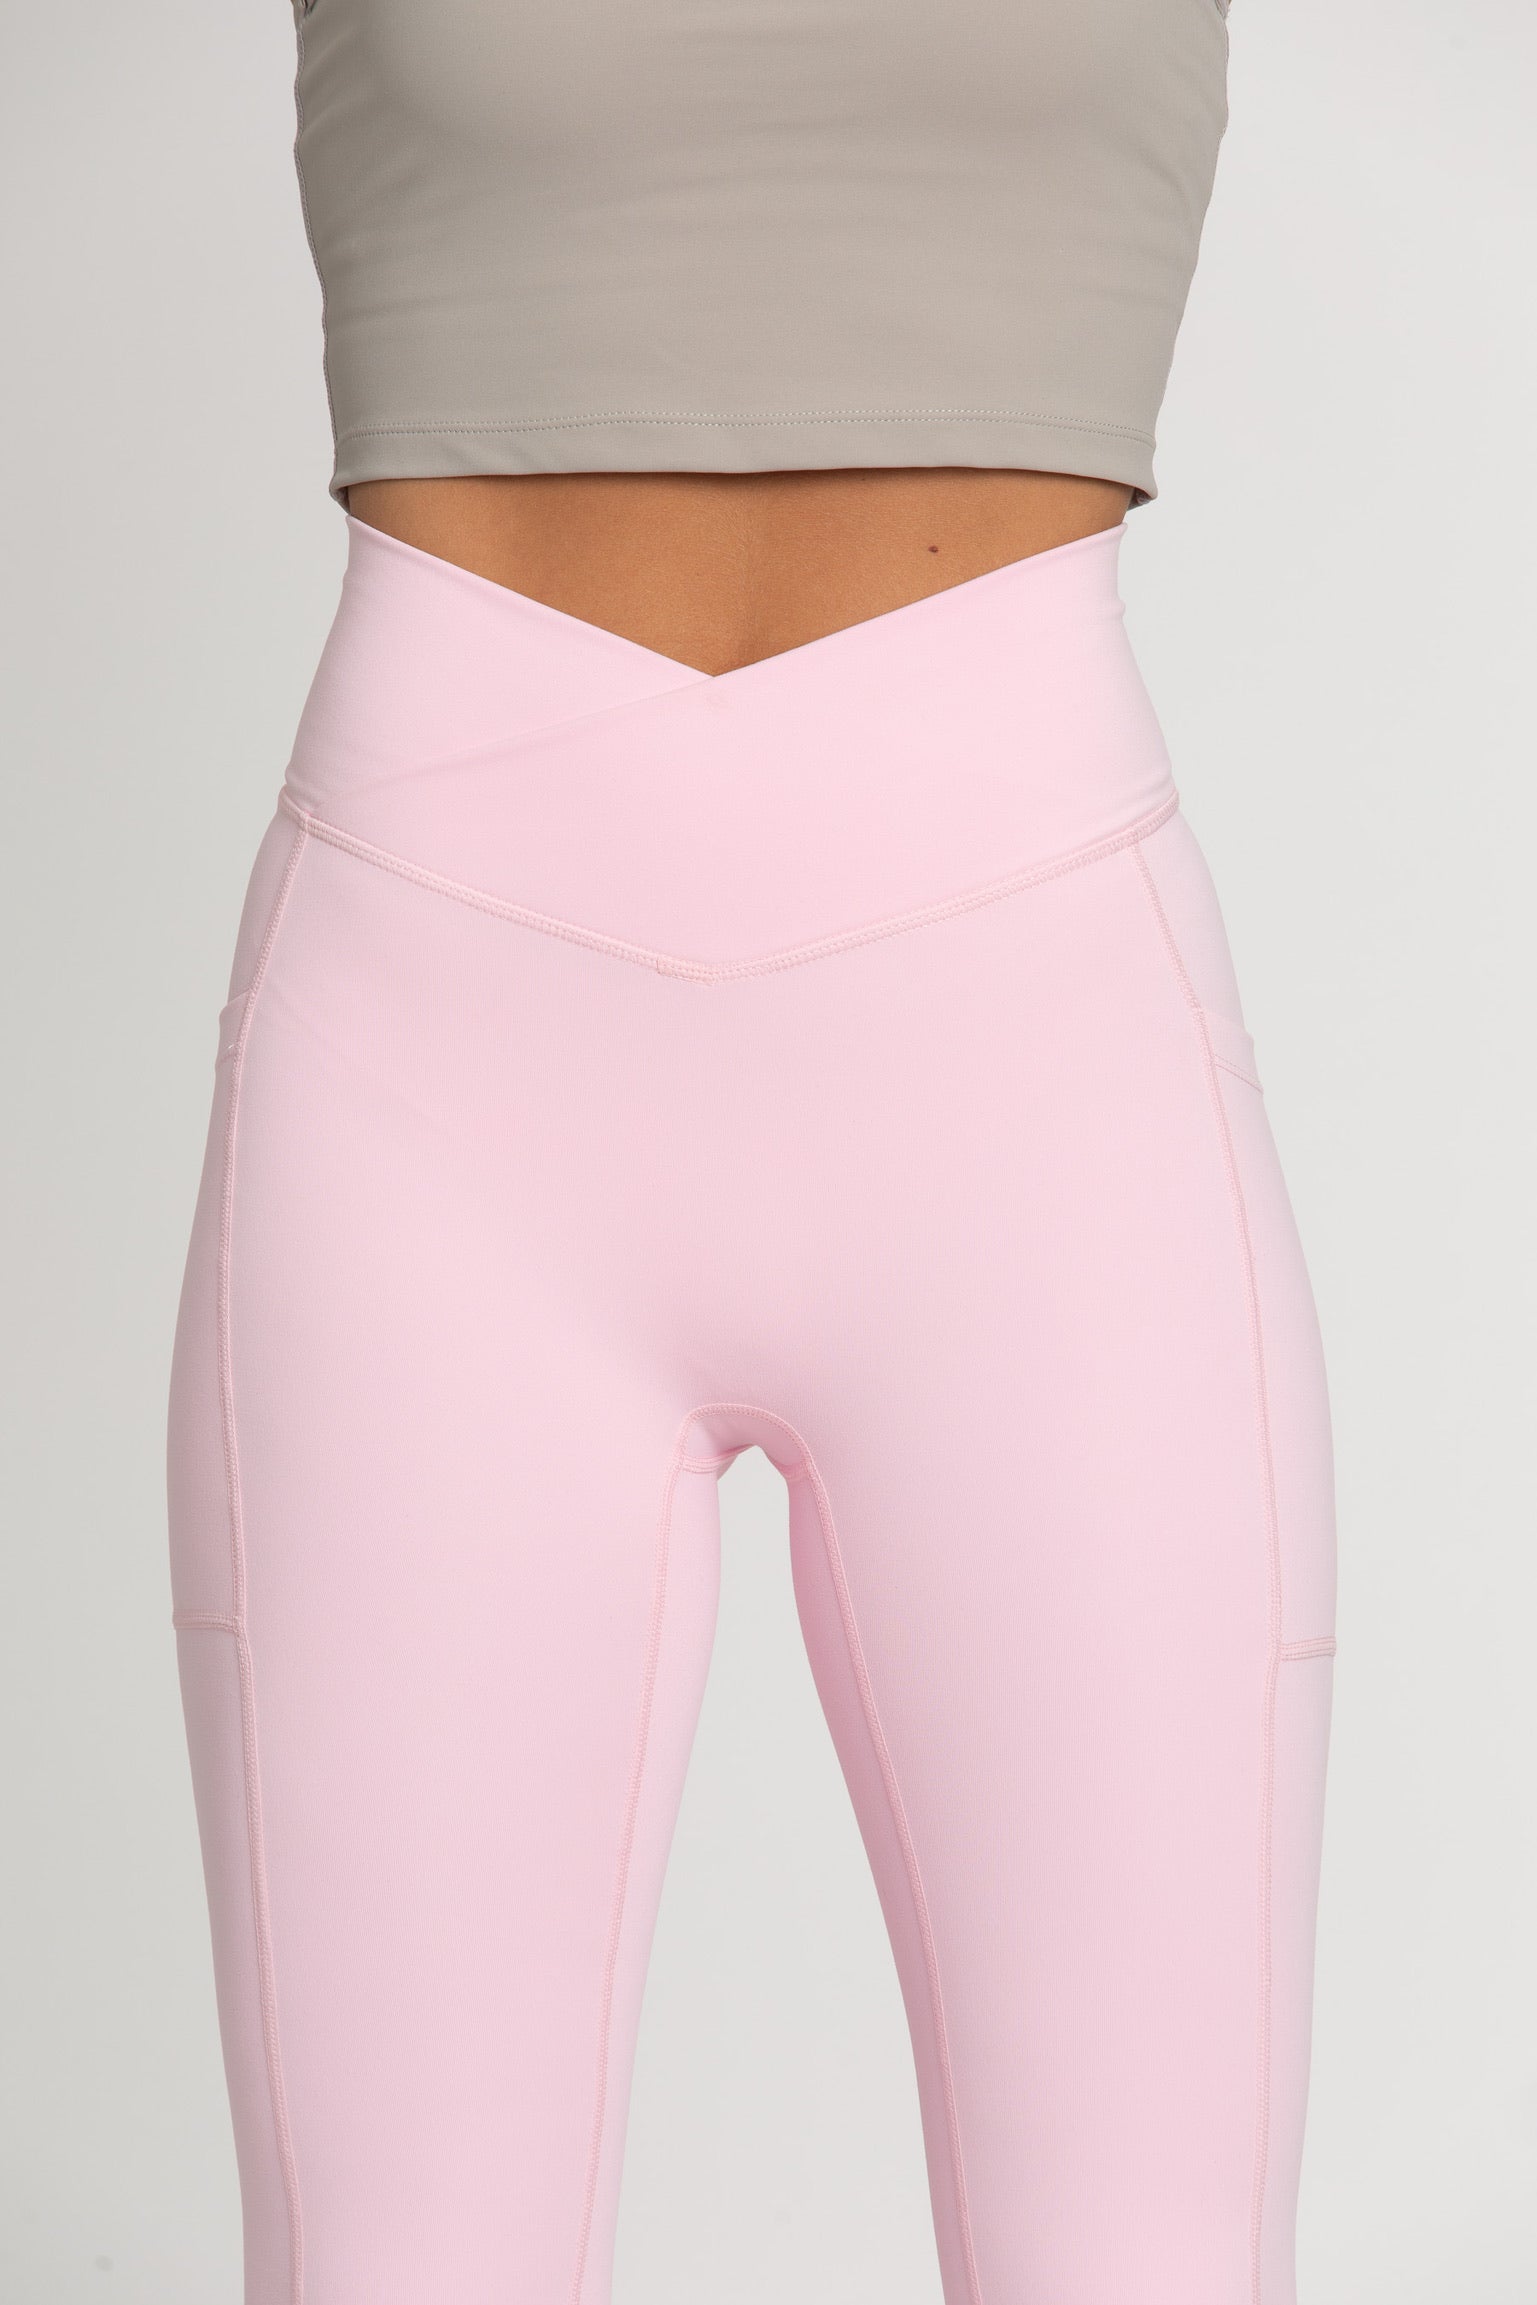 Two Tone TLC Leggings in Super Hot Red and Terez Pink – Terez.com